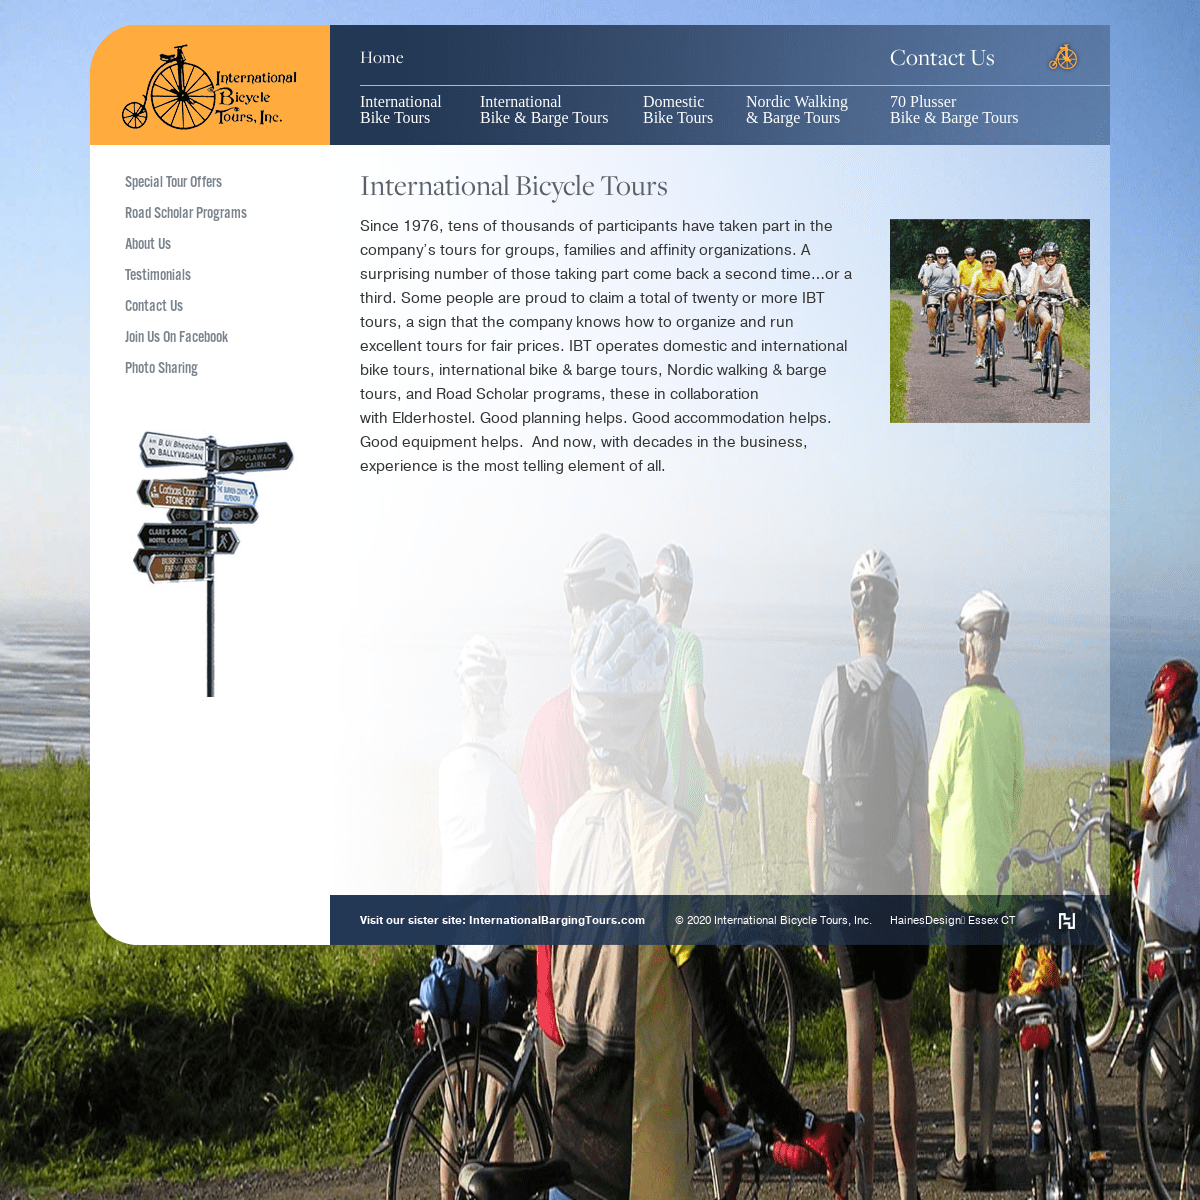 A complete backup of internationalbicycletours.com